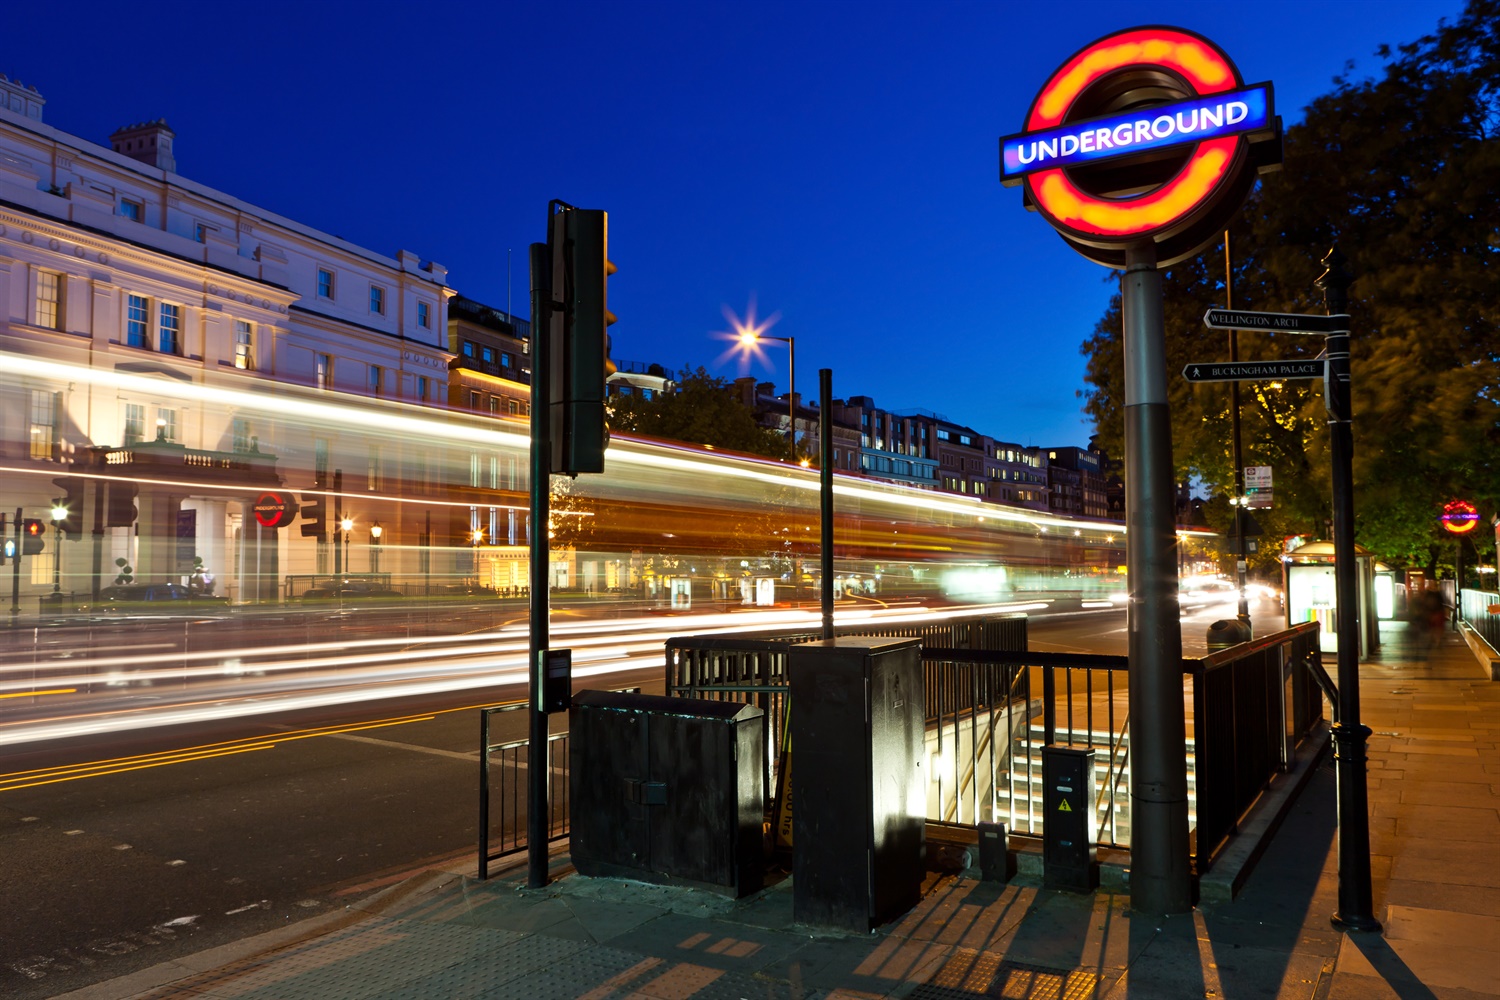 Night Tube gives London £171m boost in first year